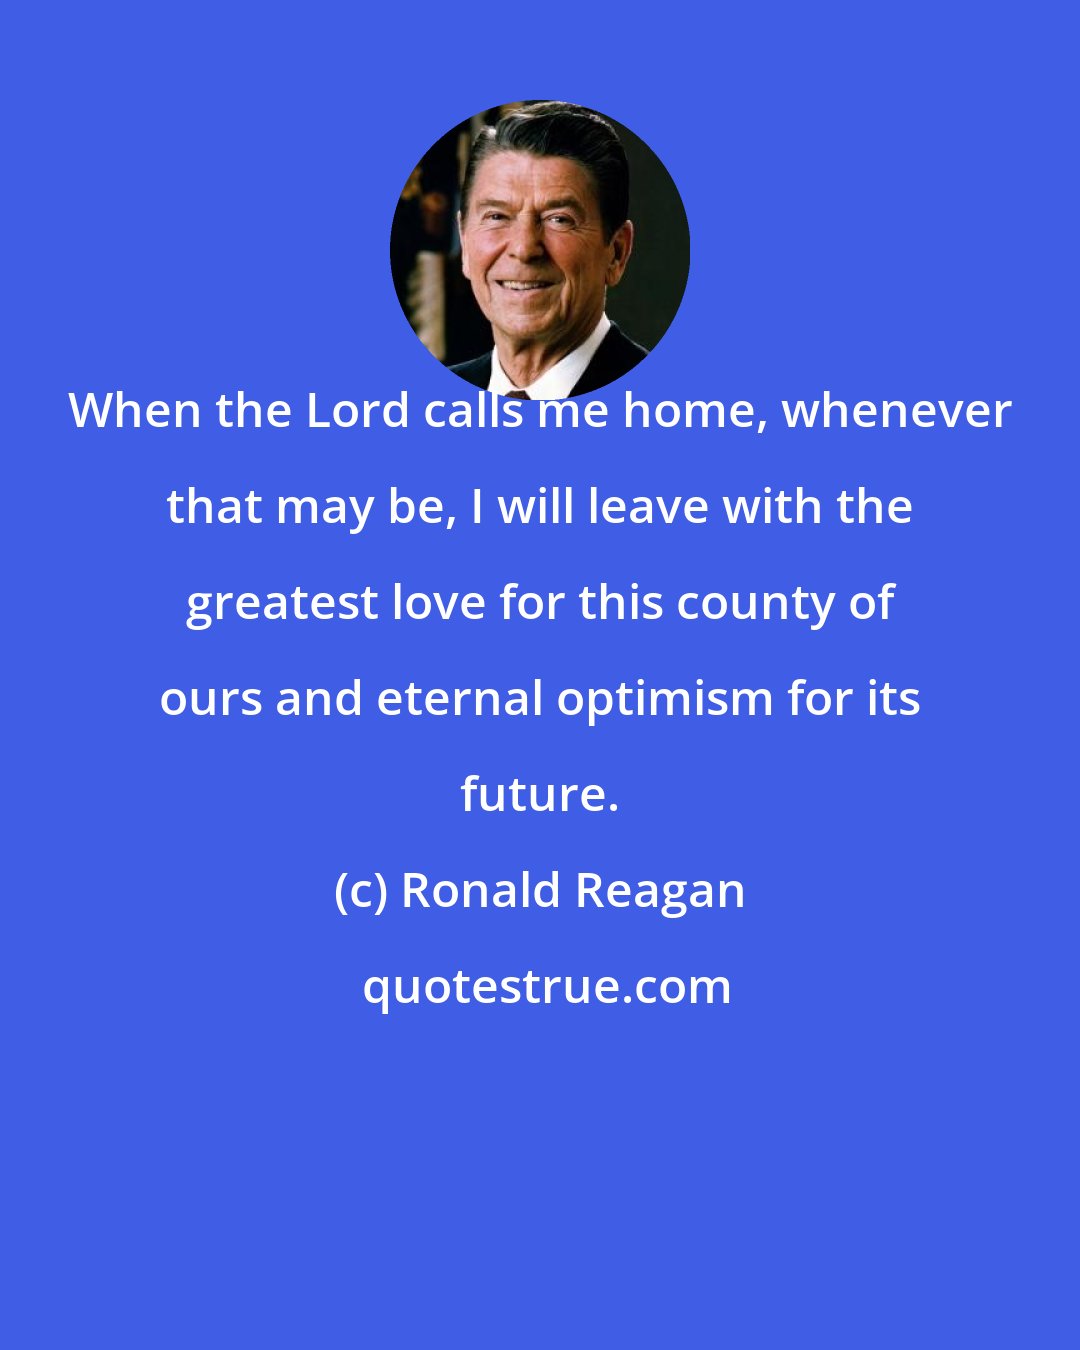 Ronald Reagan: When the Lord calls me home, whenever that may be, I will leave with the greatest love for this county of ours and eternal optimism for its future.